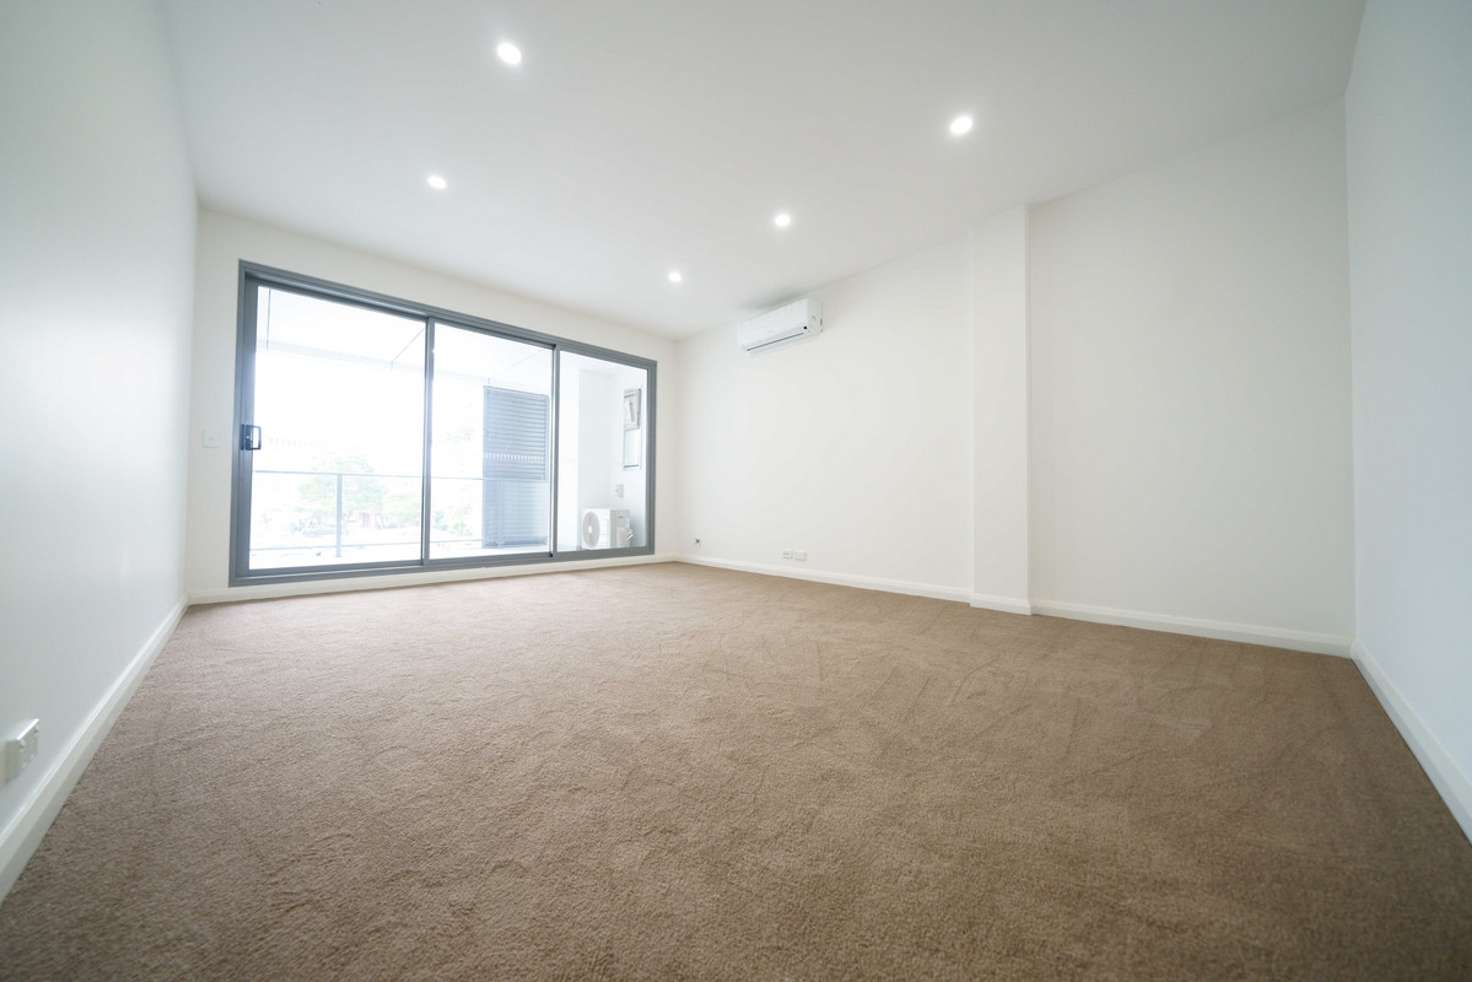 Main view of Homely apartment listing, 213/74-80 Restwell Street, Bankstown NSW 2200